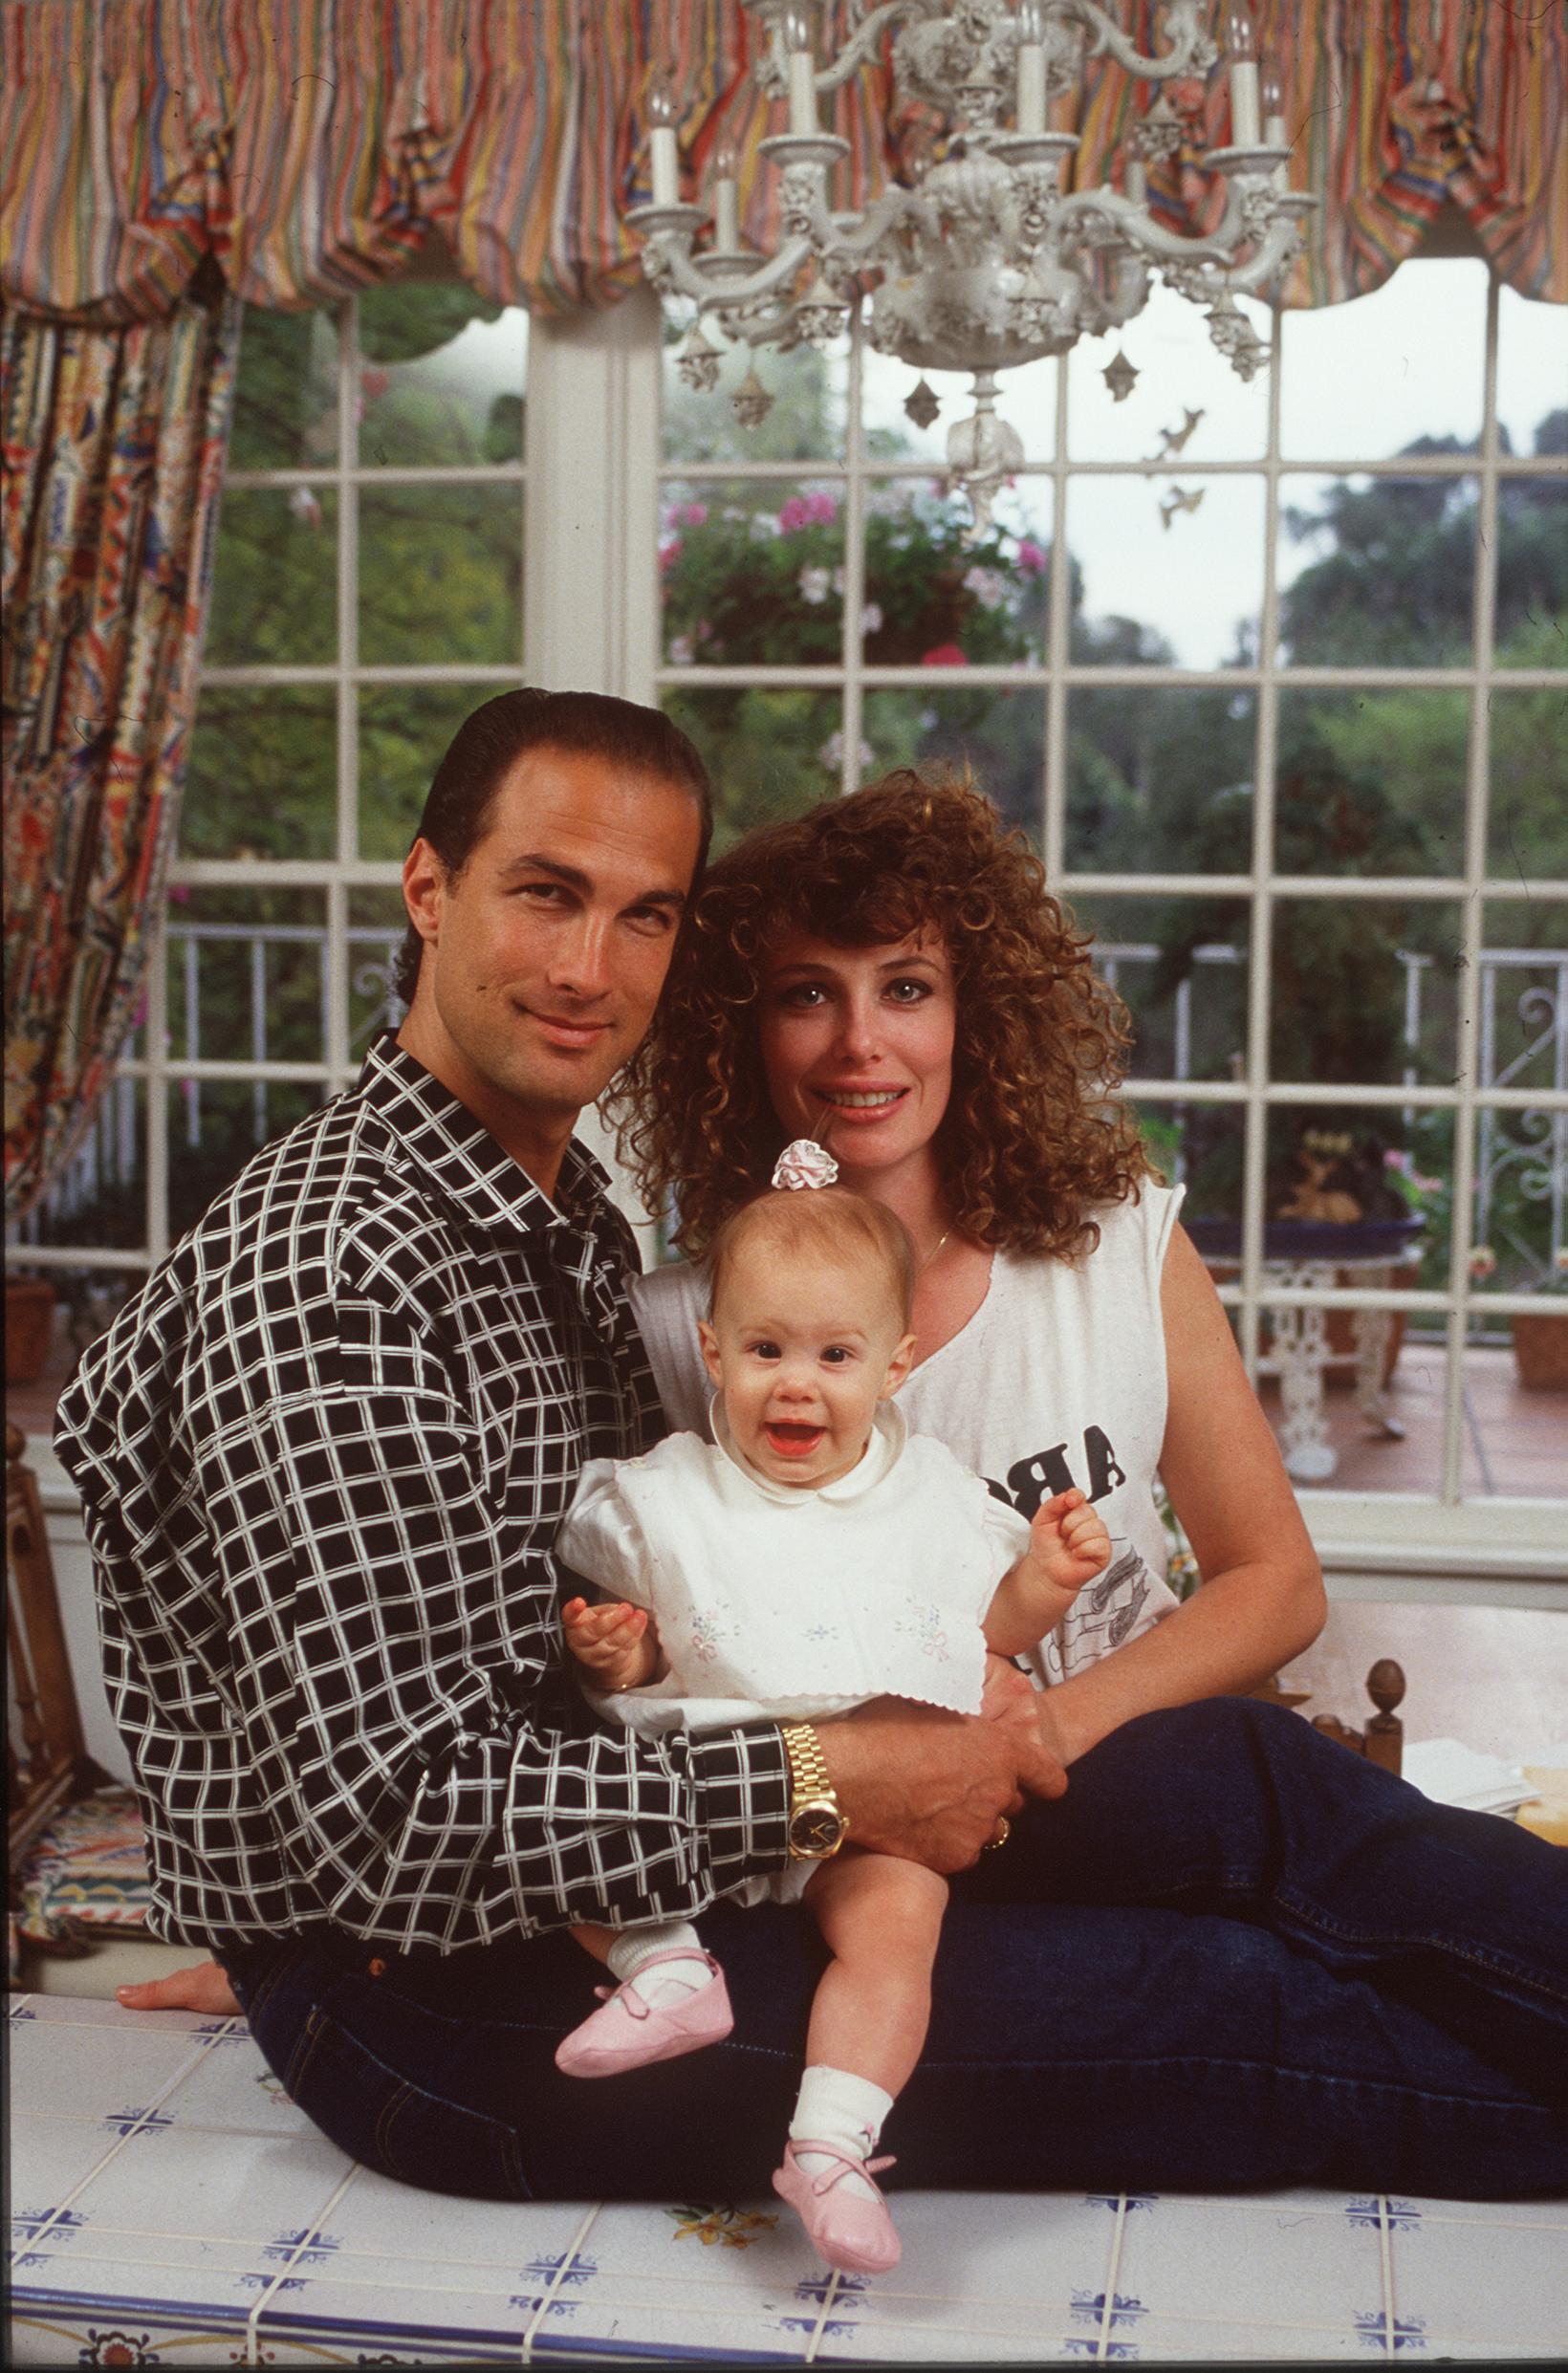 Steven Seagal and Kelly LeBrock at home with their first child on April 13, 1989, in Beverly Hills, California | Photo: Paul Harris/Getty Images